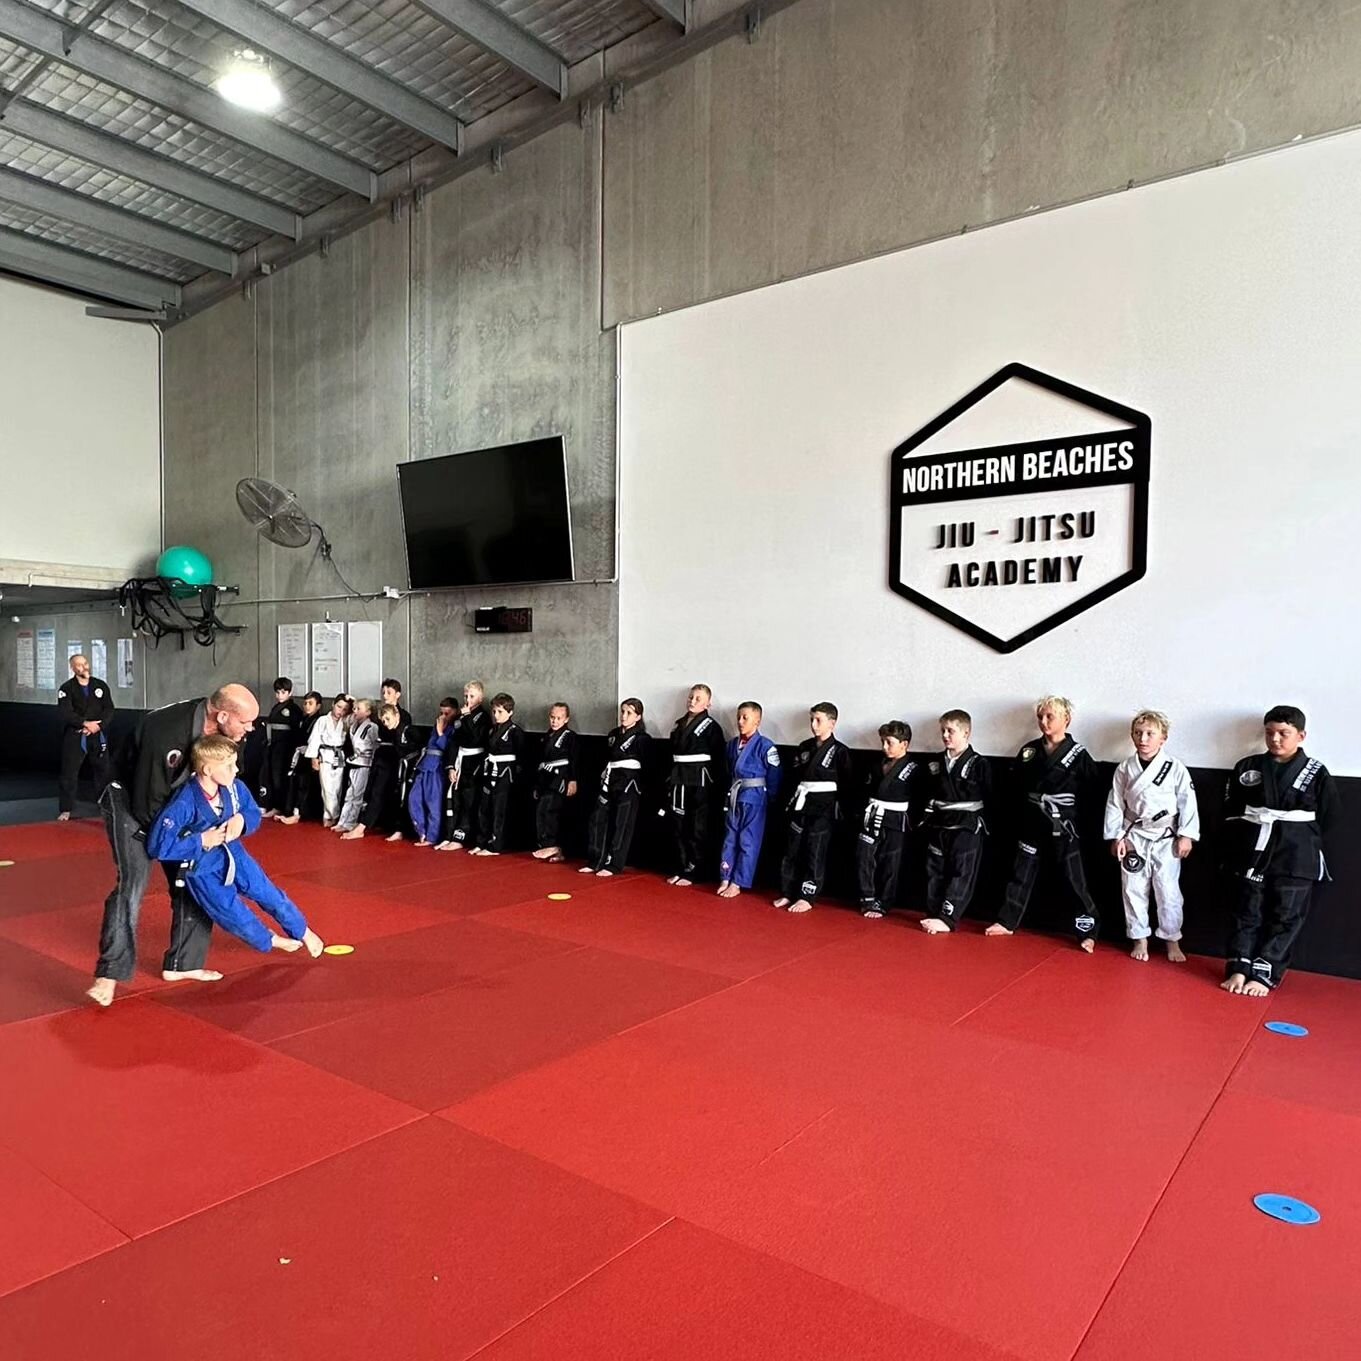 The Monday line up of Grommets learning the art of Jiu-jitsu 🤙